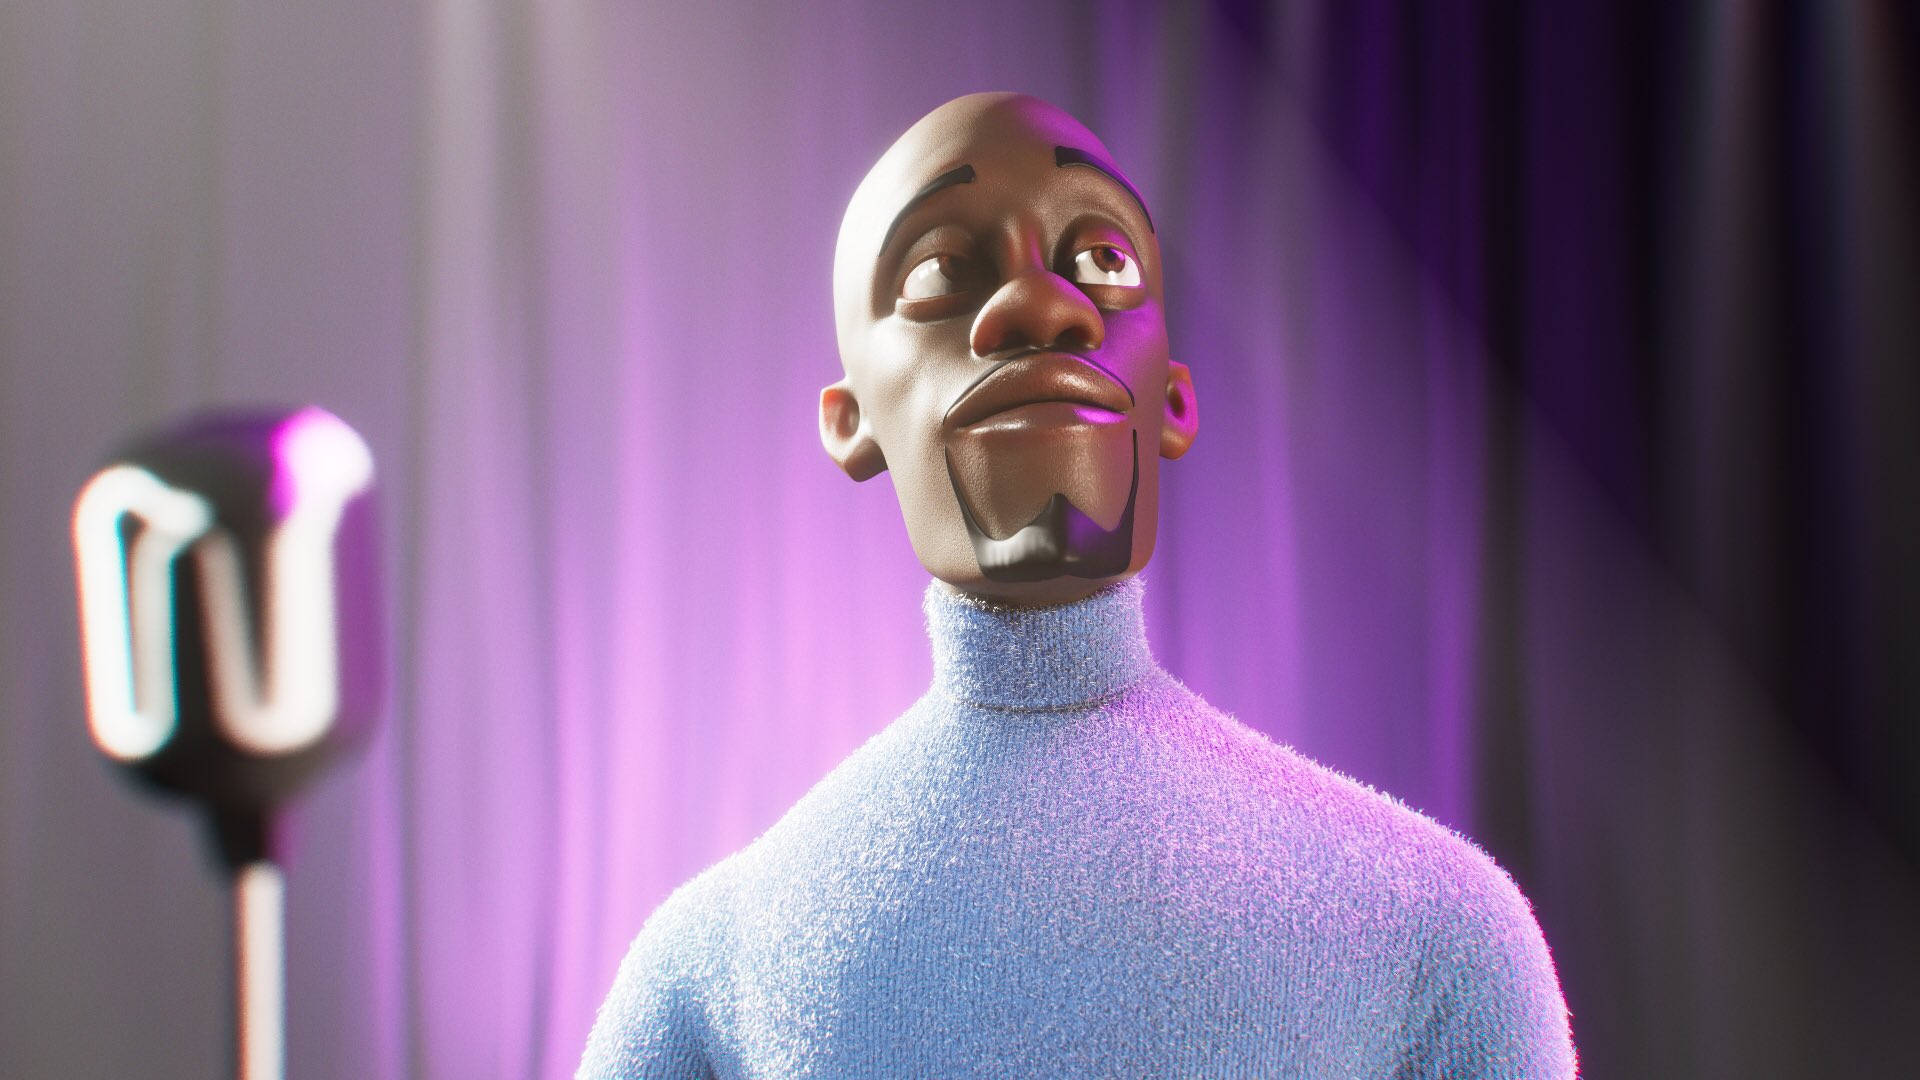 Frozone Wallpaper Images